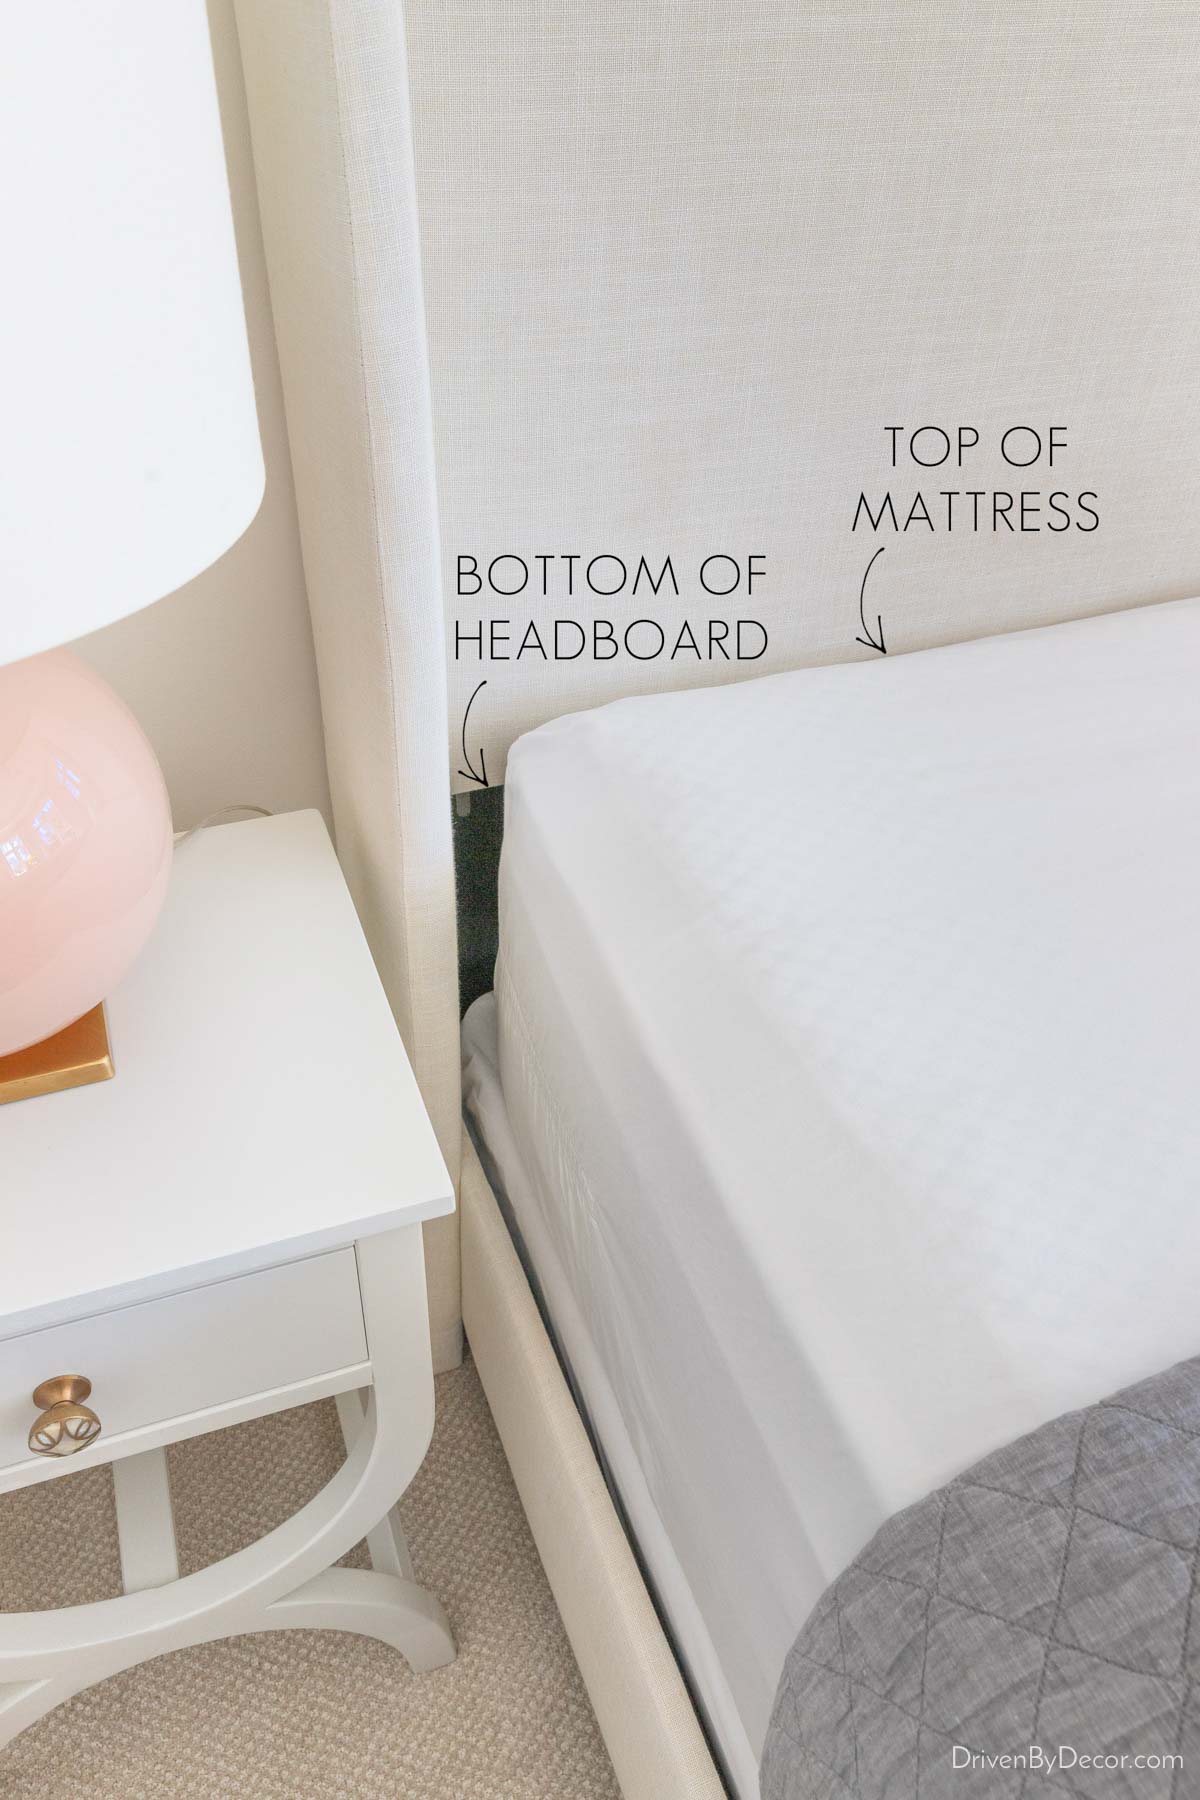 Be sure the top of your mattress is taller than the bottom of the headboard